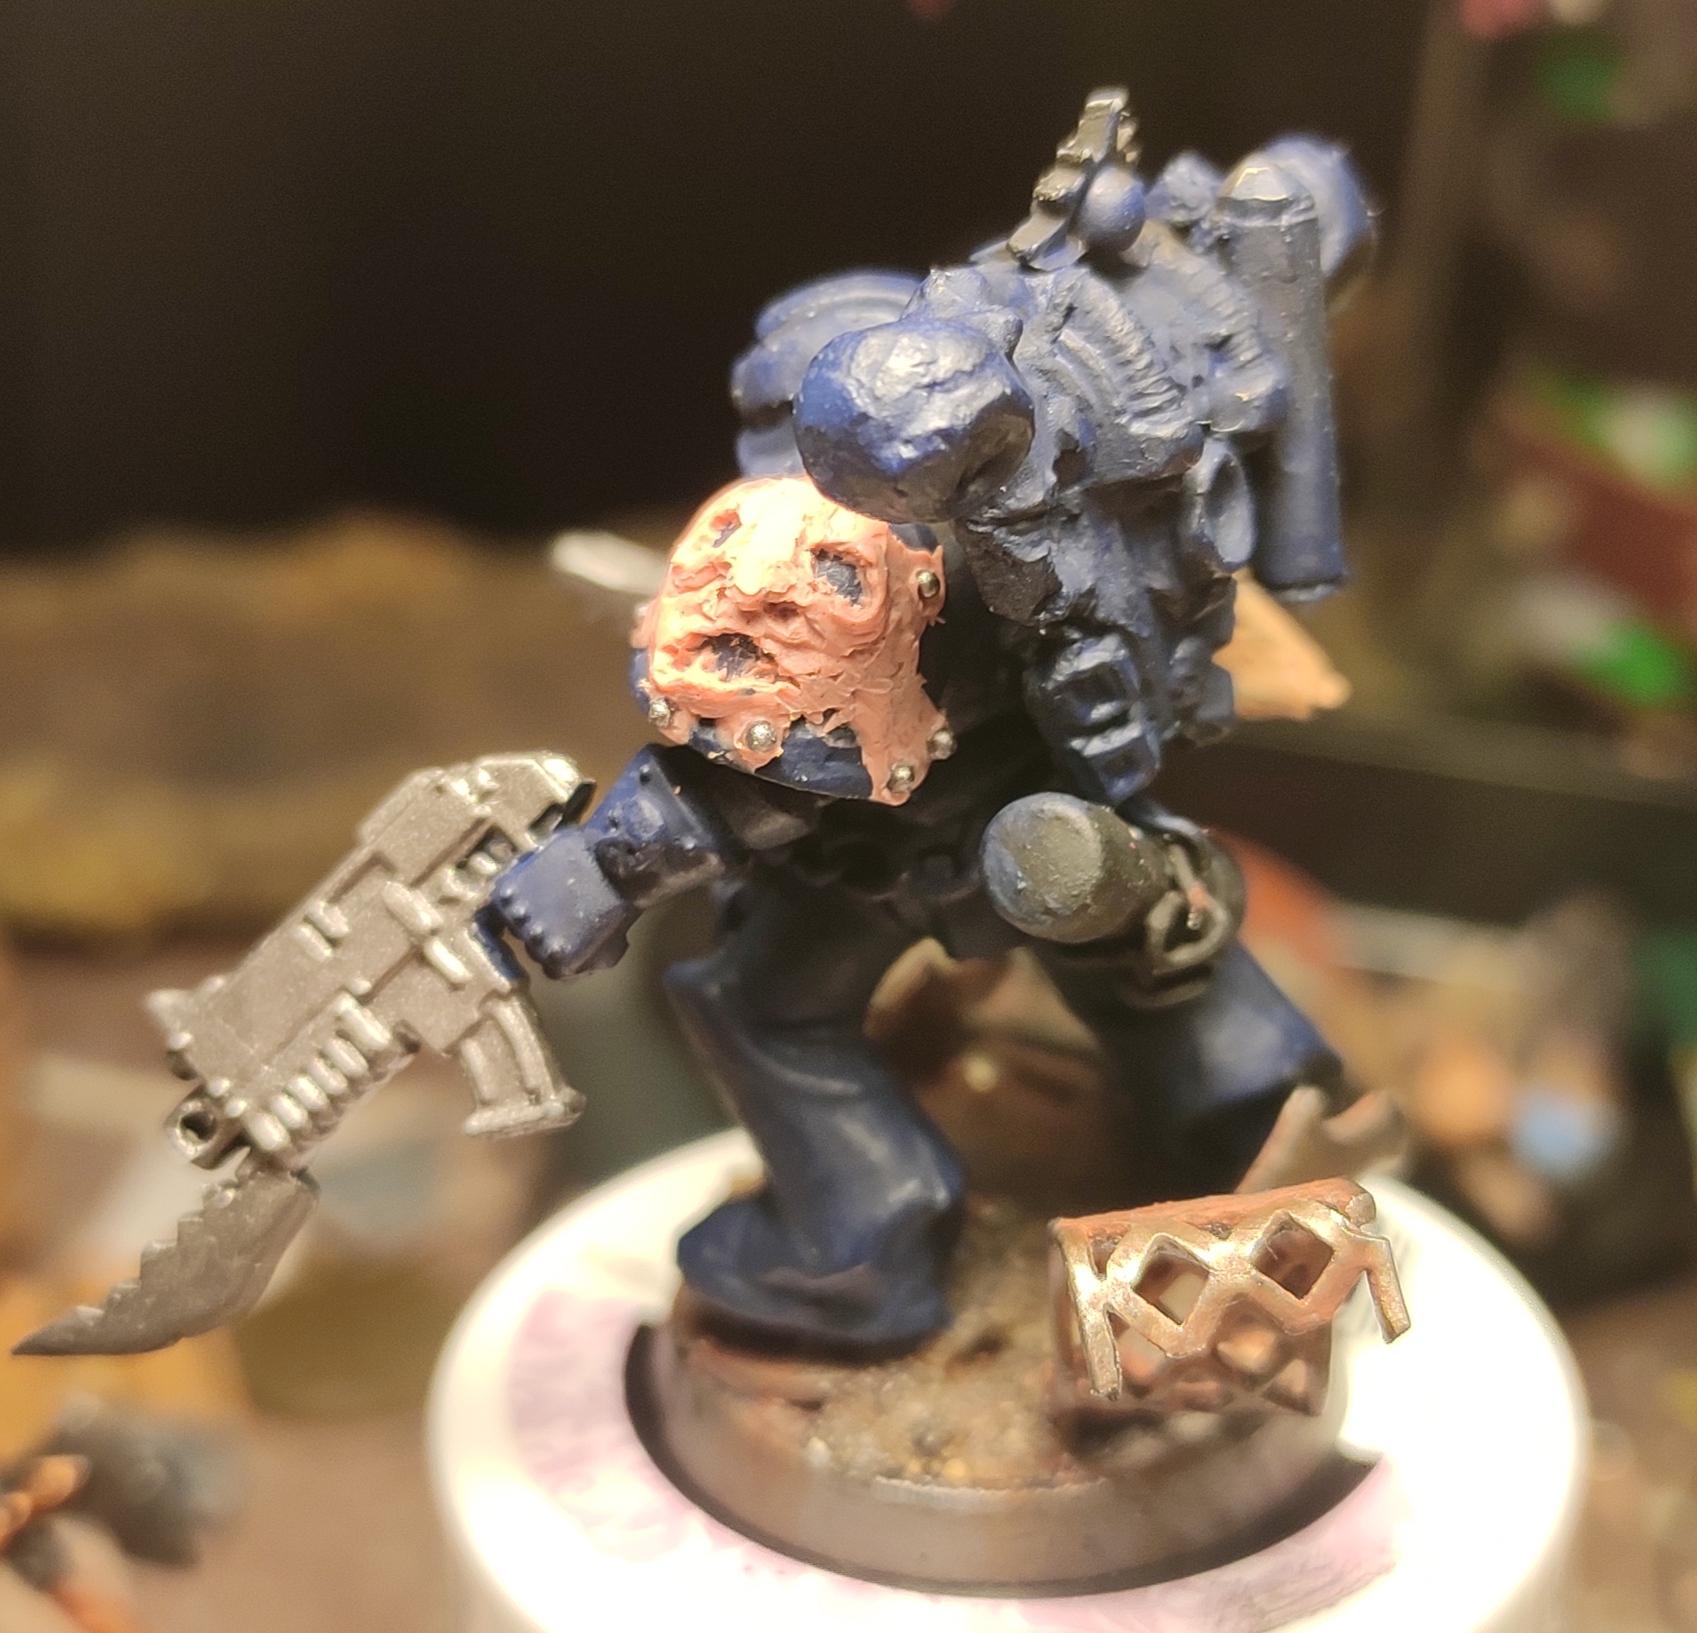 Apothecary, Ave Dominus Nox, Bayonet, Blurred Photo, Bolter, Chaos, Chaos Space Marines, Chaos Undivided, Container, Conversion, Epoxy, Face, First Claw, Flayed Face, Flayed Skin, Heresy, Heretic Astartes, Infantry, Kitbash, Narthecium, Night Lords, Putty, Scratch Build, Sculpting, Traitor Legions, Trophy, Variel, Variel The Flayer, Warhammer 40,000, Work In Progress